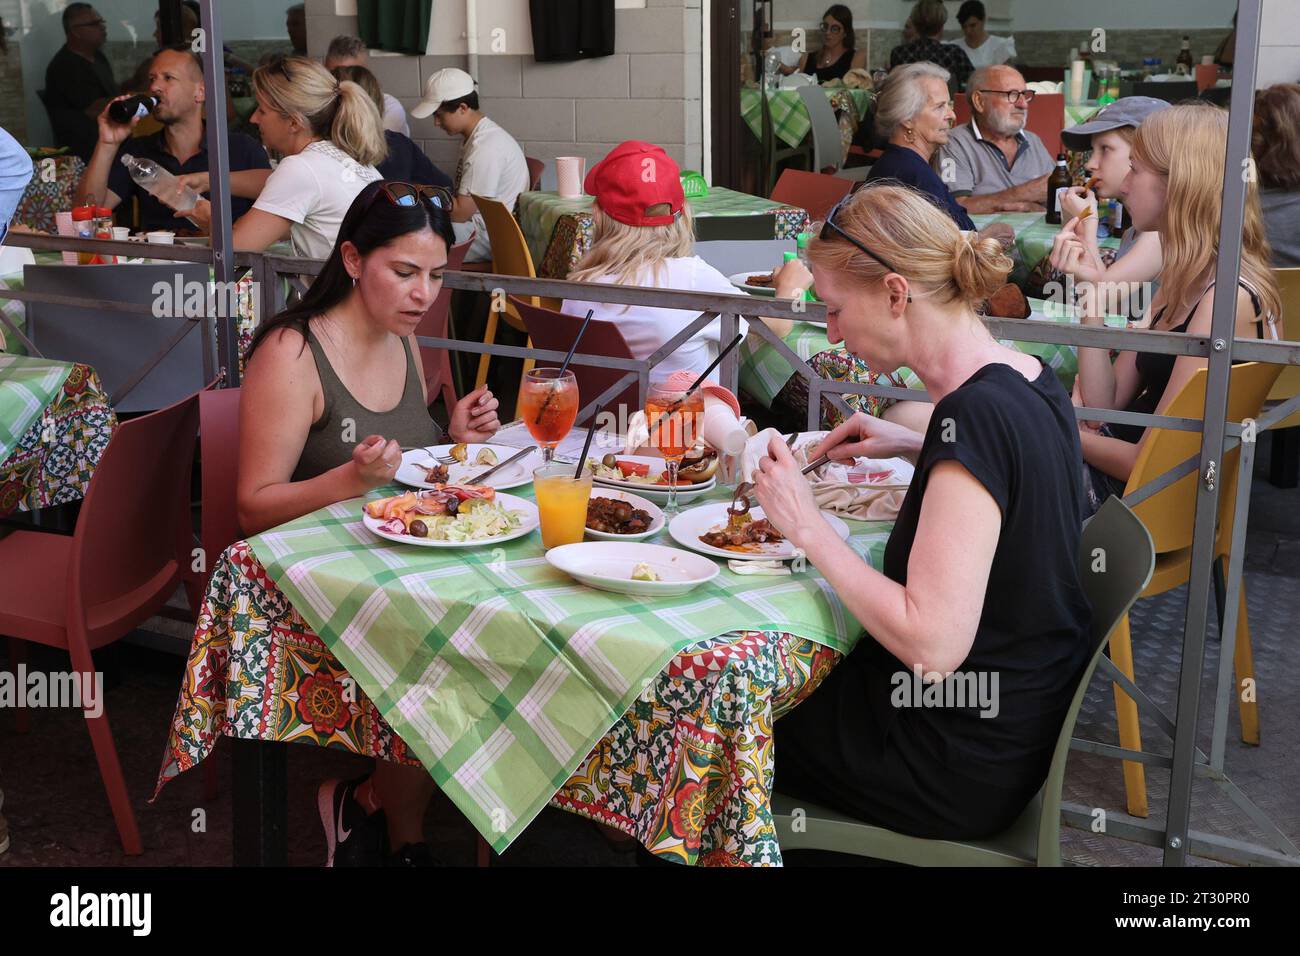 Diners eatng at a cafe in the Ballarò market in Palermo, Sicily, Italy Stock Photo